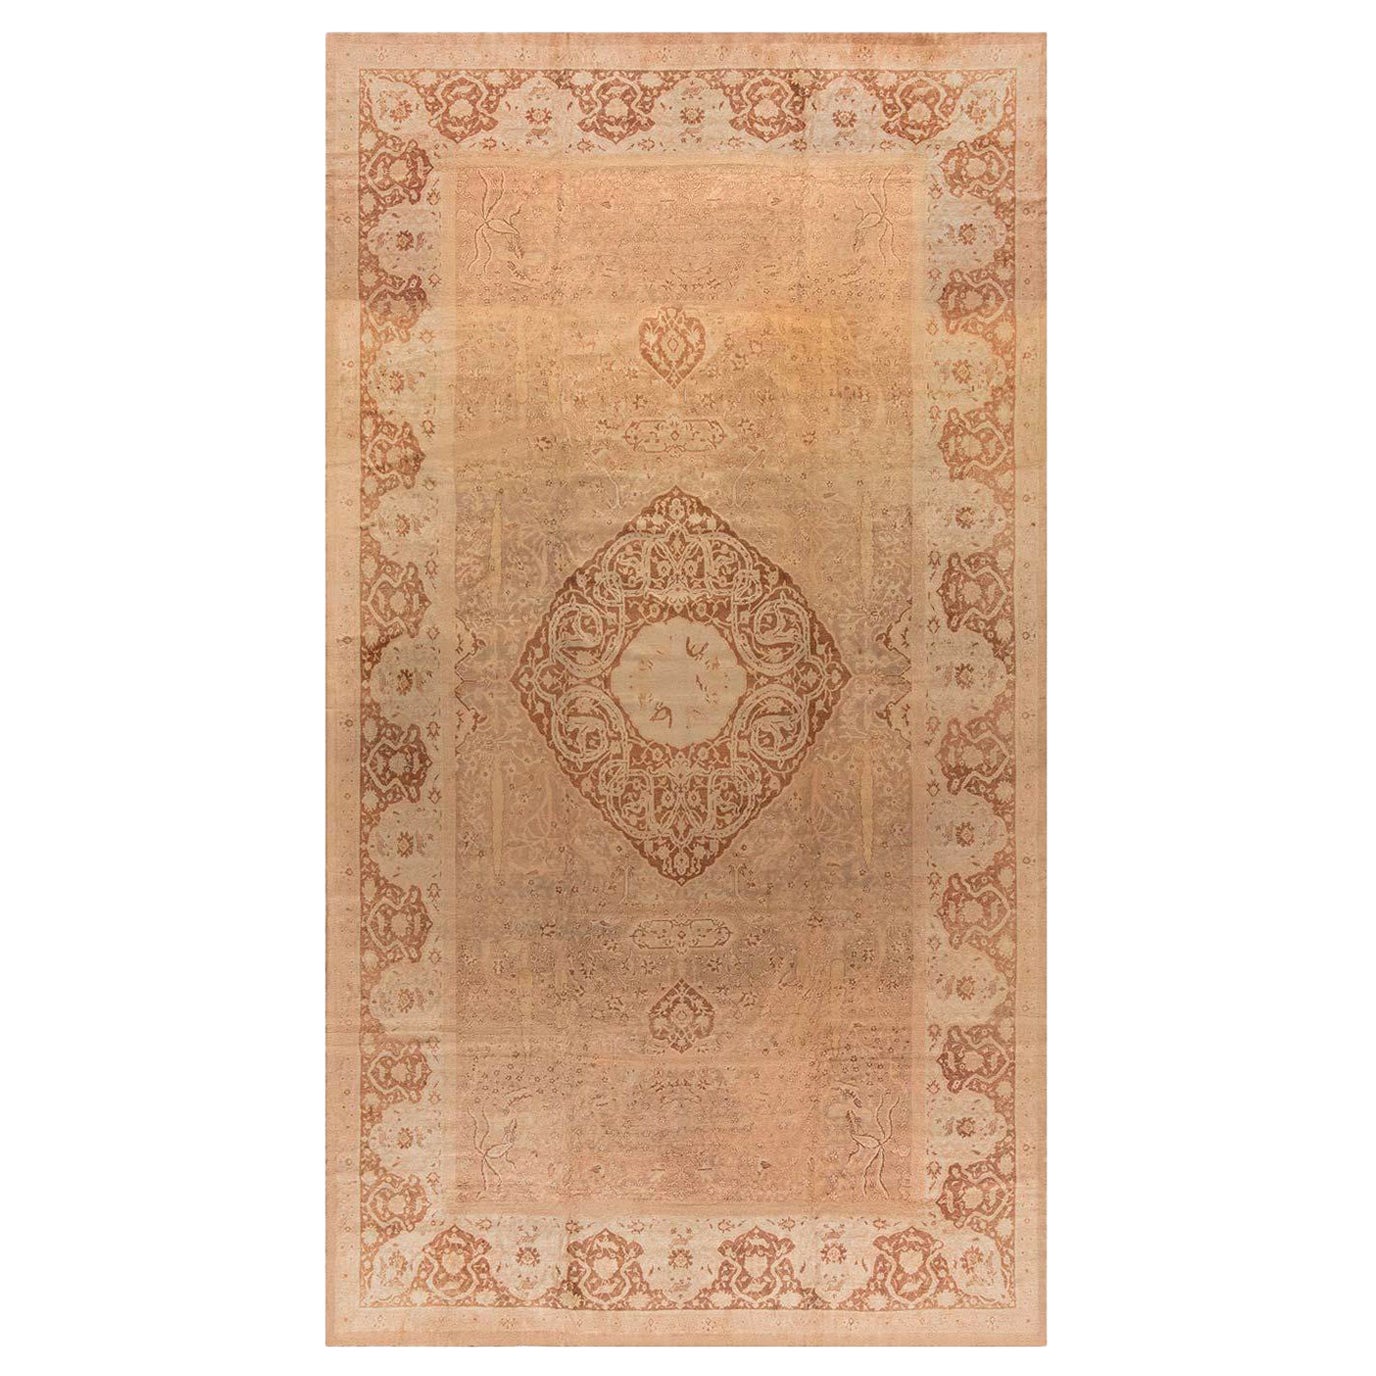 Authentic 19th Century Indian Amritsar Rug For Sale